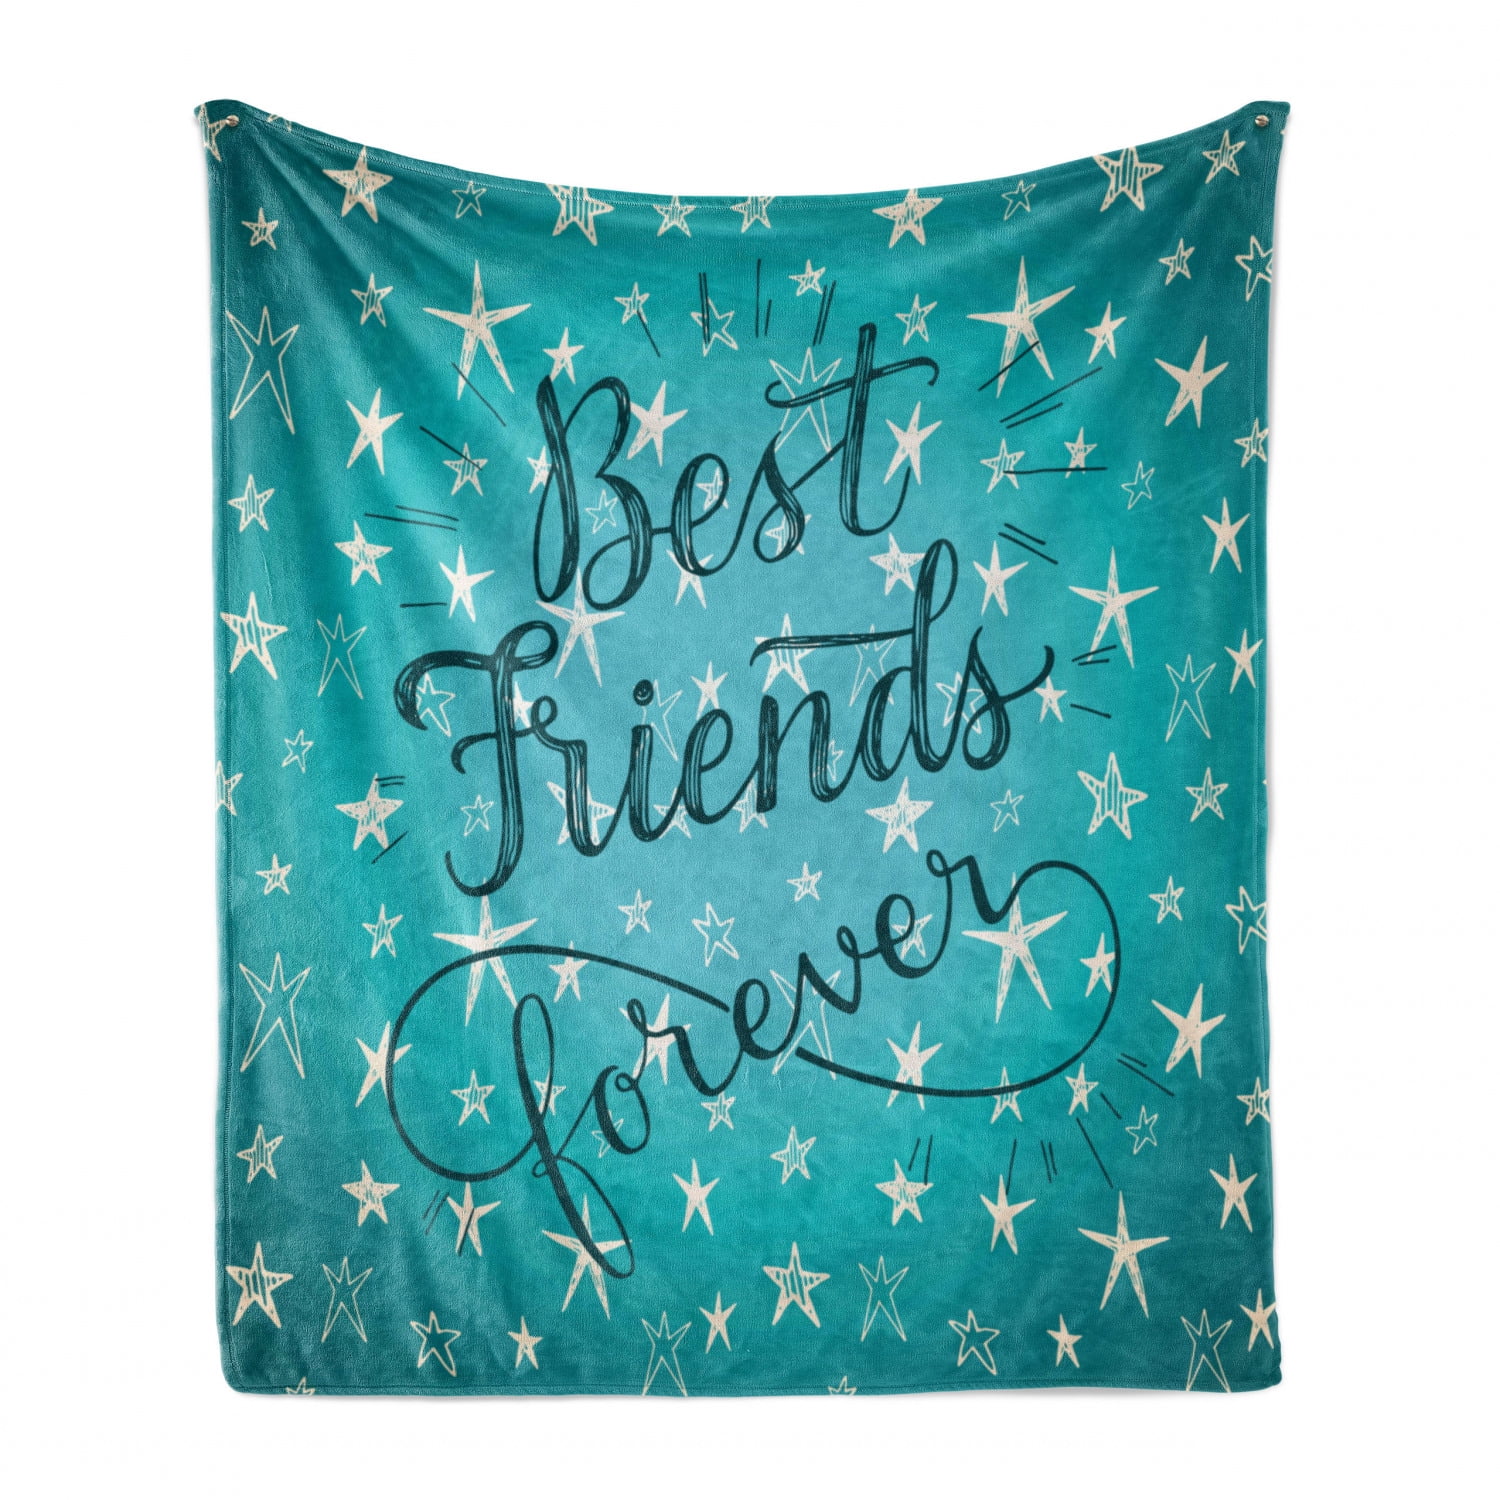 50 x 60 Pale Green Dark Teal Cozy Plush for Indoor and Outdoor Use Ambesonne Saying Soft Flannel Fleece Throw Blanket Best Friends Forever Message on Scribbled and Hatched Stars